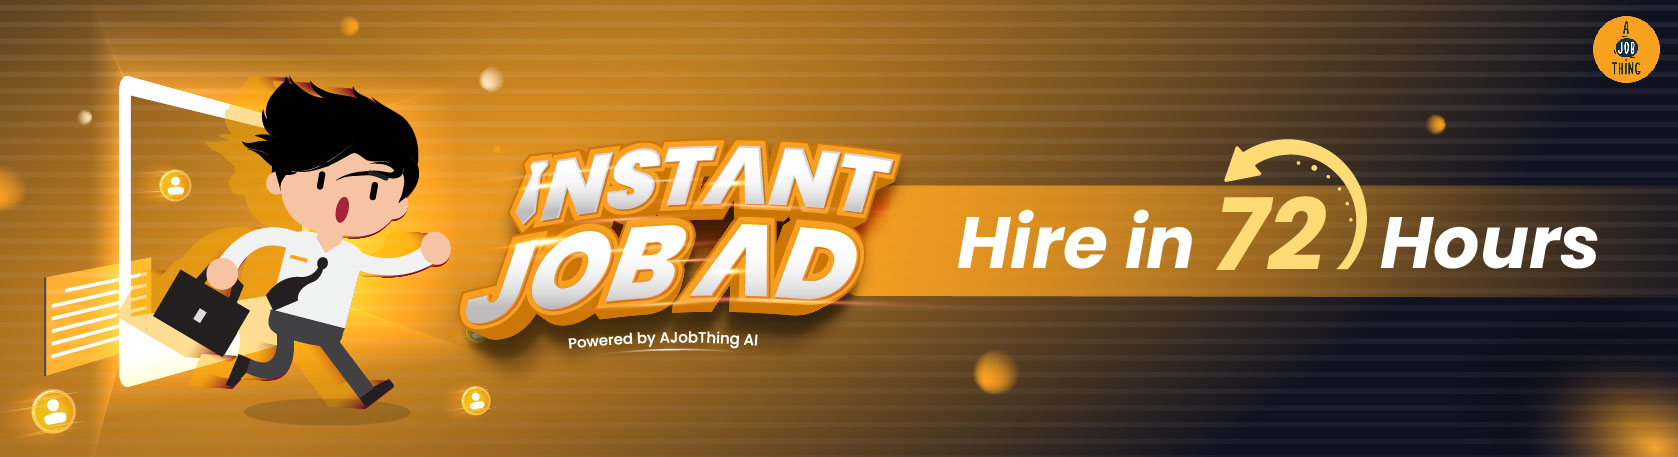 instant-job-ad-ajobthing